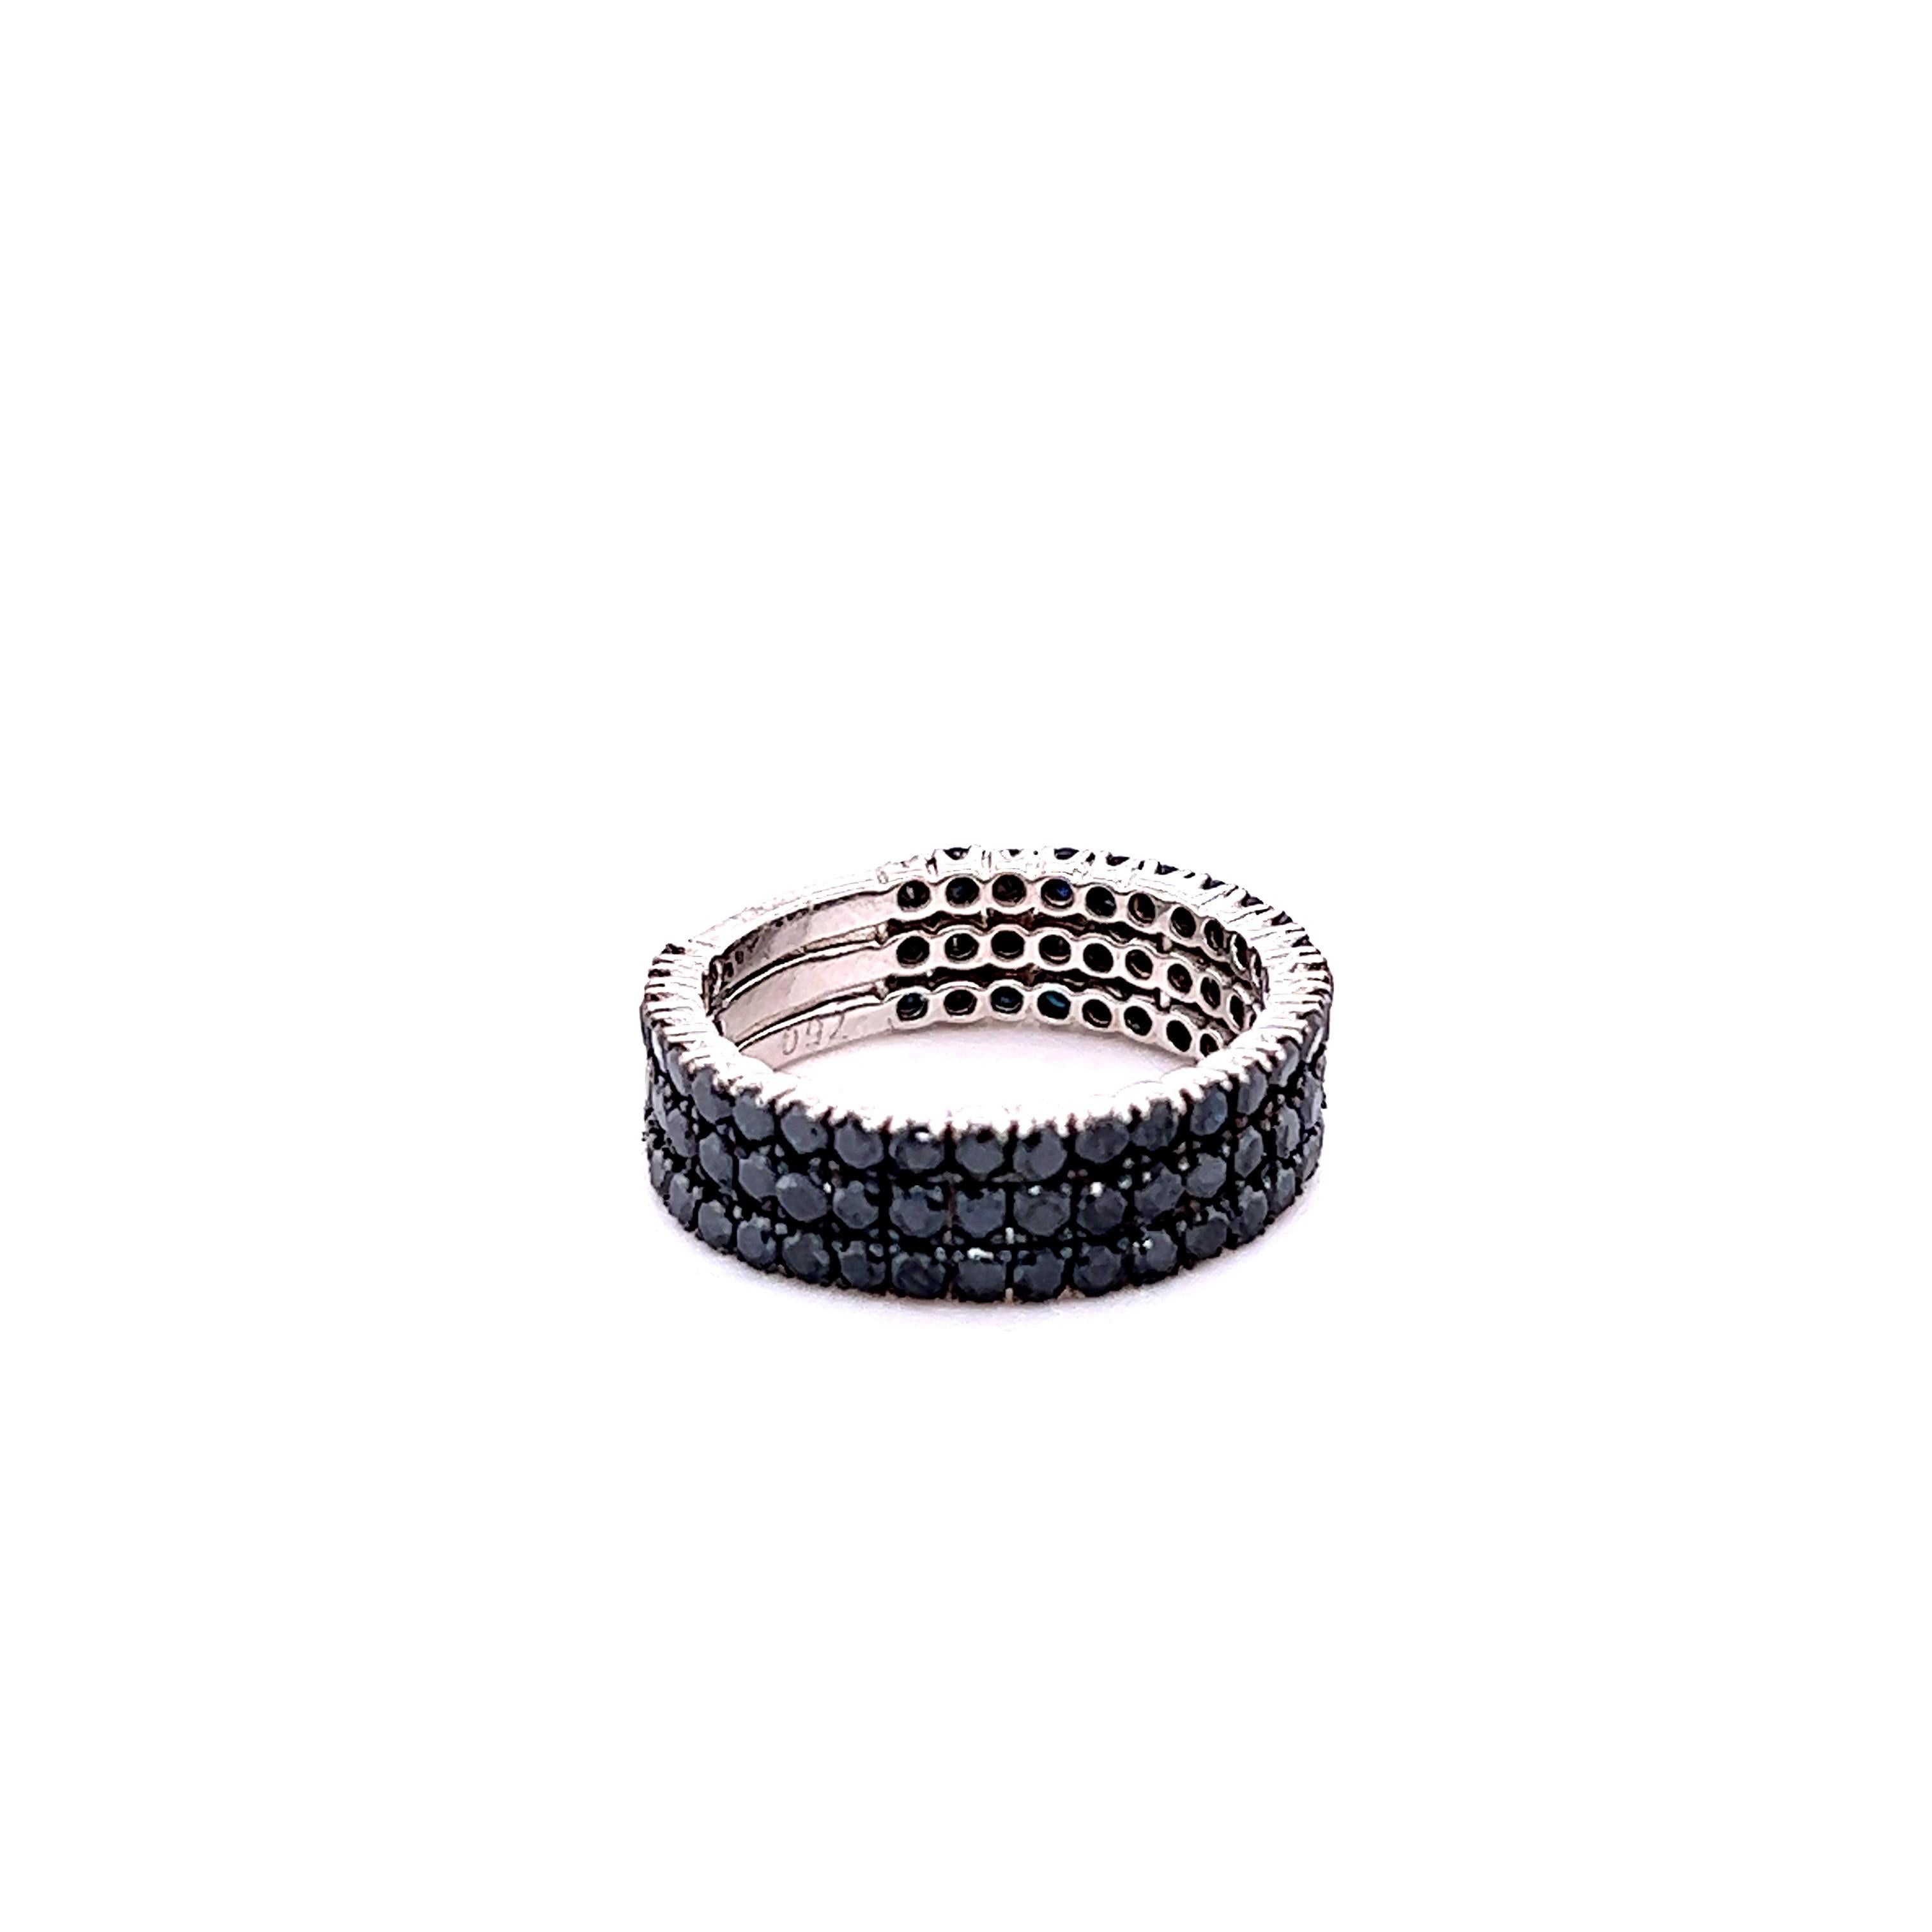 This ring has 90 Natural Round Cut Black Diamonds that weigh 2.17 carats. 
The black diamonds are natural and are color treated to attain its black color. 

It is set in 14 Karat White Gold and has a weight of approximately 4.4 grams. 
The width of